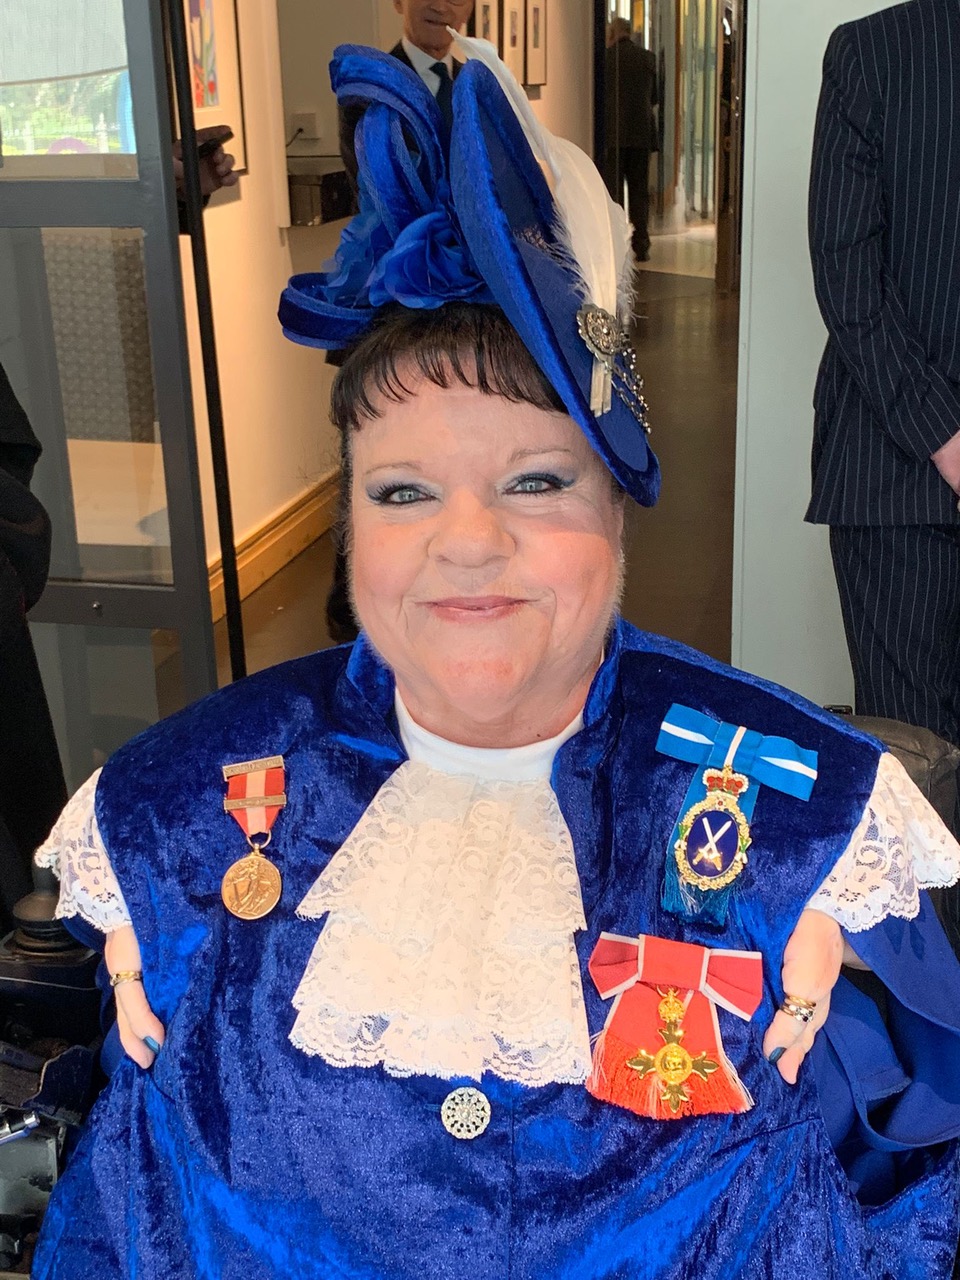 Rosie Moriarty-Simmonds dressed in ceremonial robes as she becomes High Sheriff of South Glamorgan